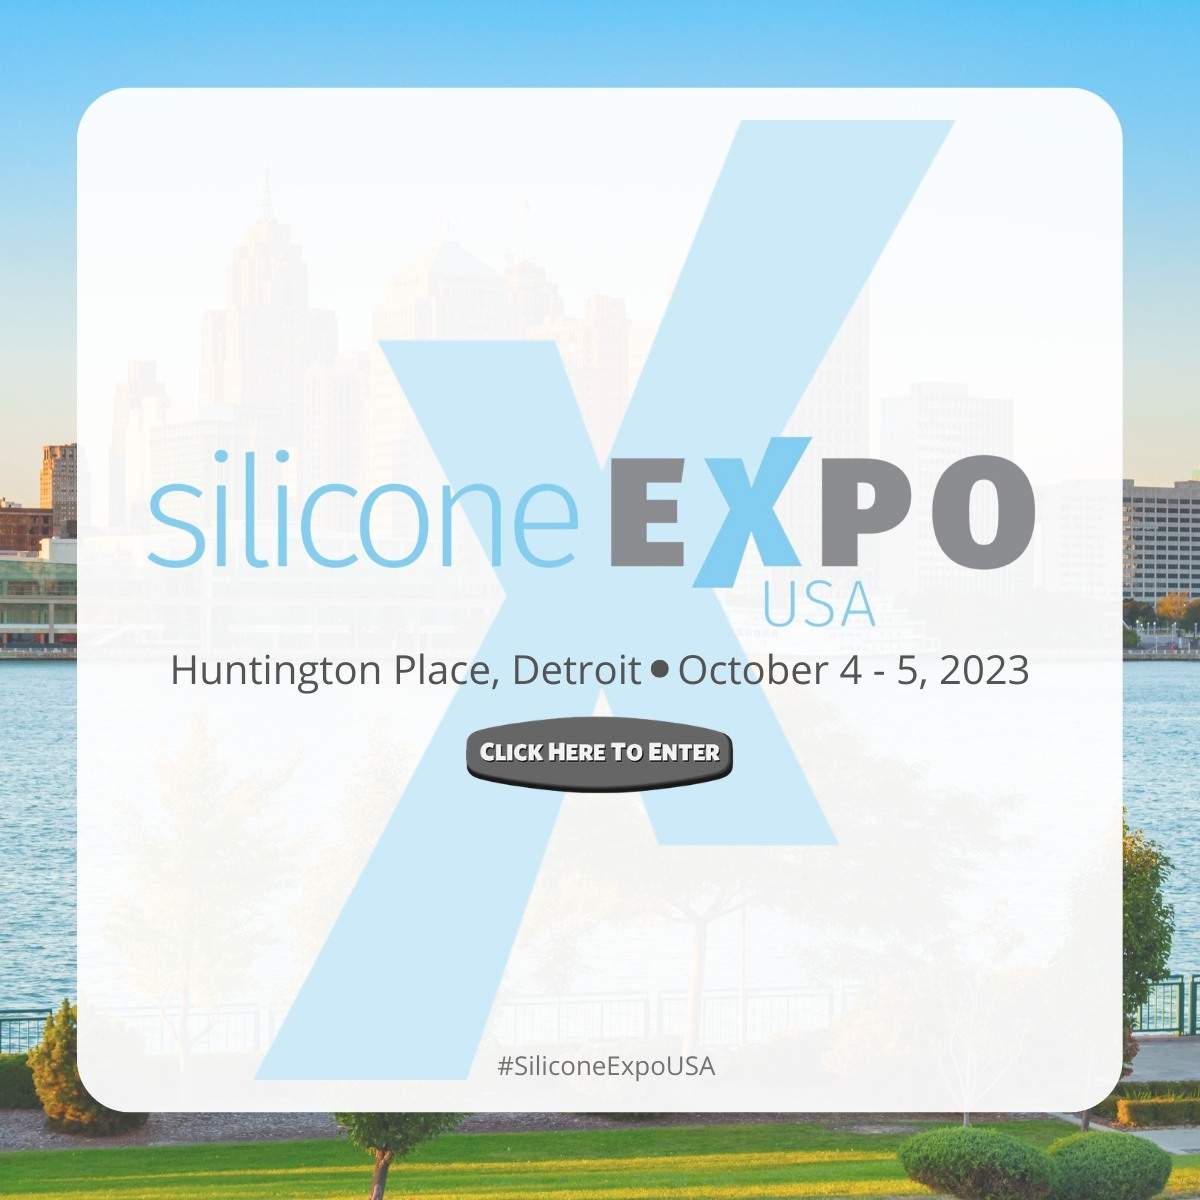 Silicone Expo USA logo. Held at Huntington Place, Detroit on October 4th and 5th 2023. Grey button with white text 'click here to enter'..